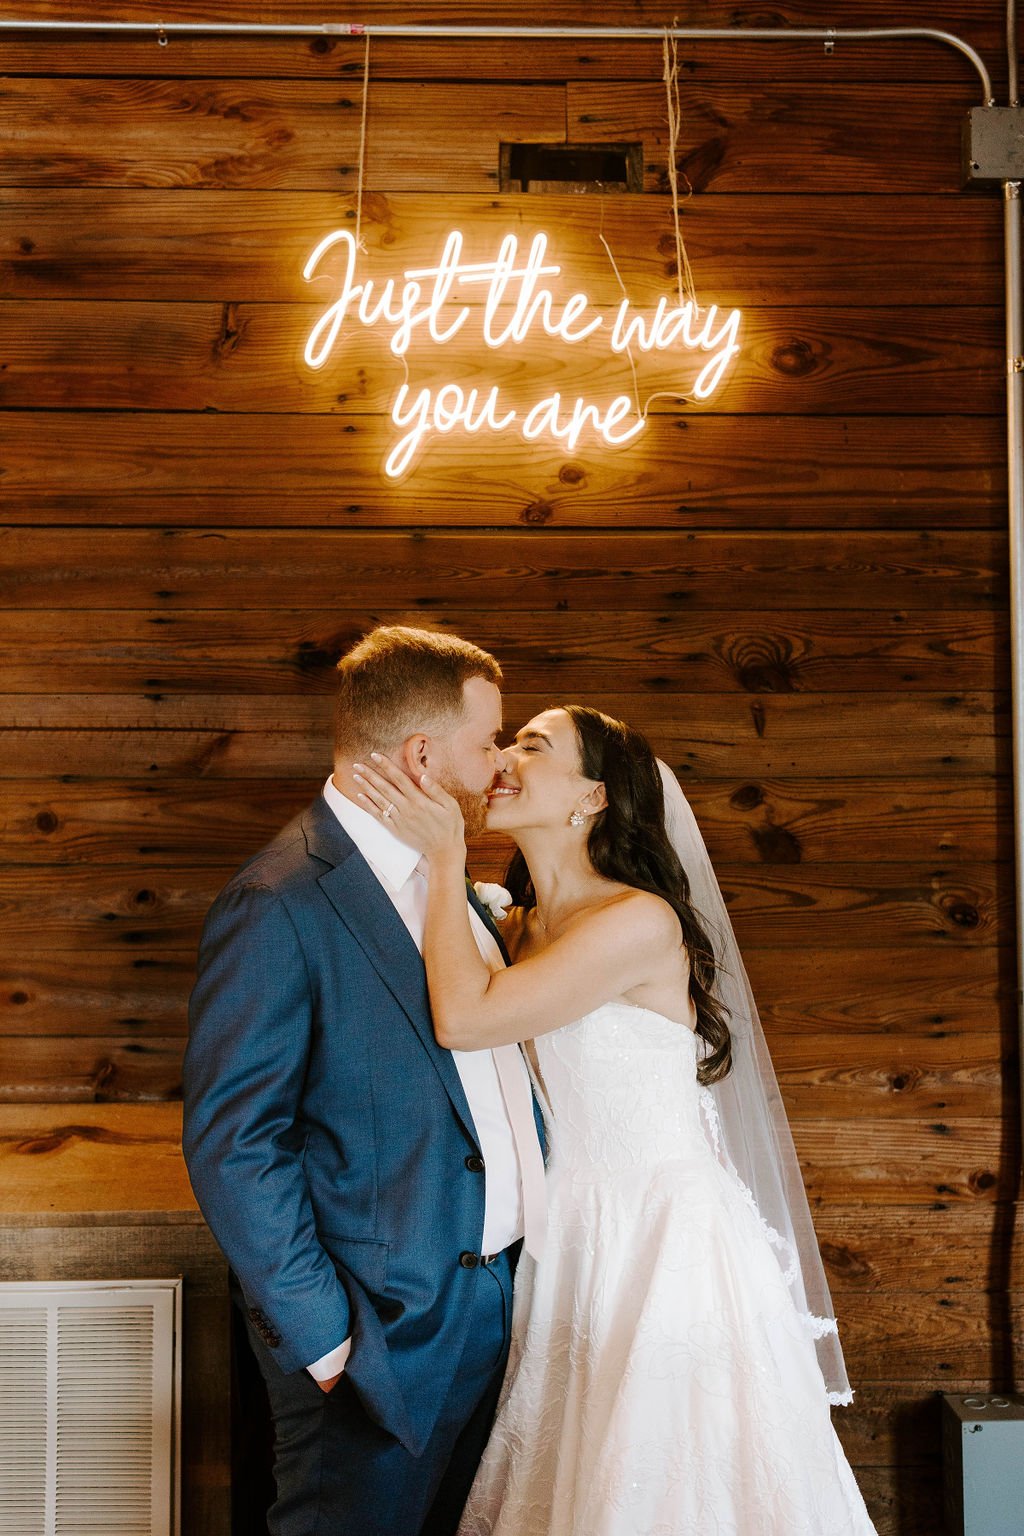 Bride and groom smiling at eachother in front of sign that read "Just the way you are"